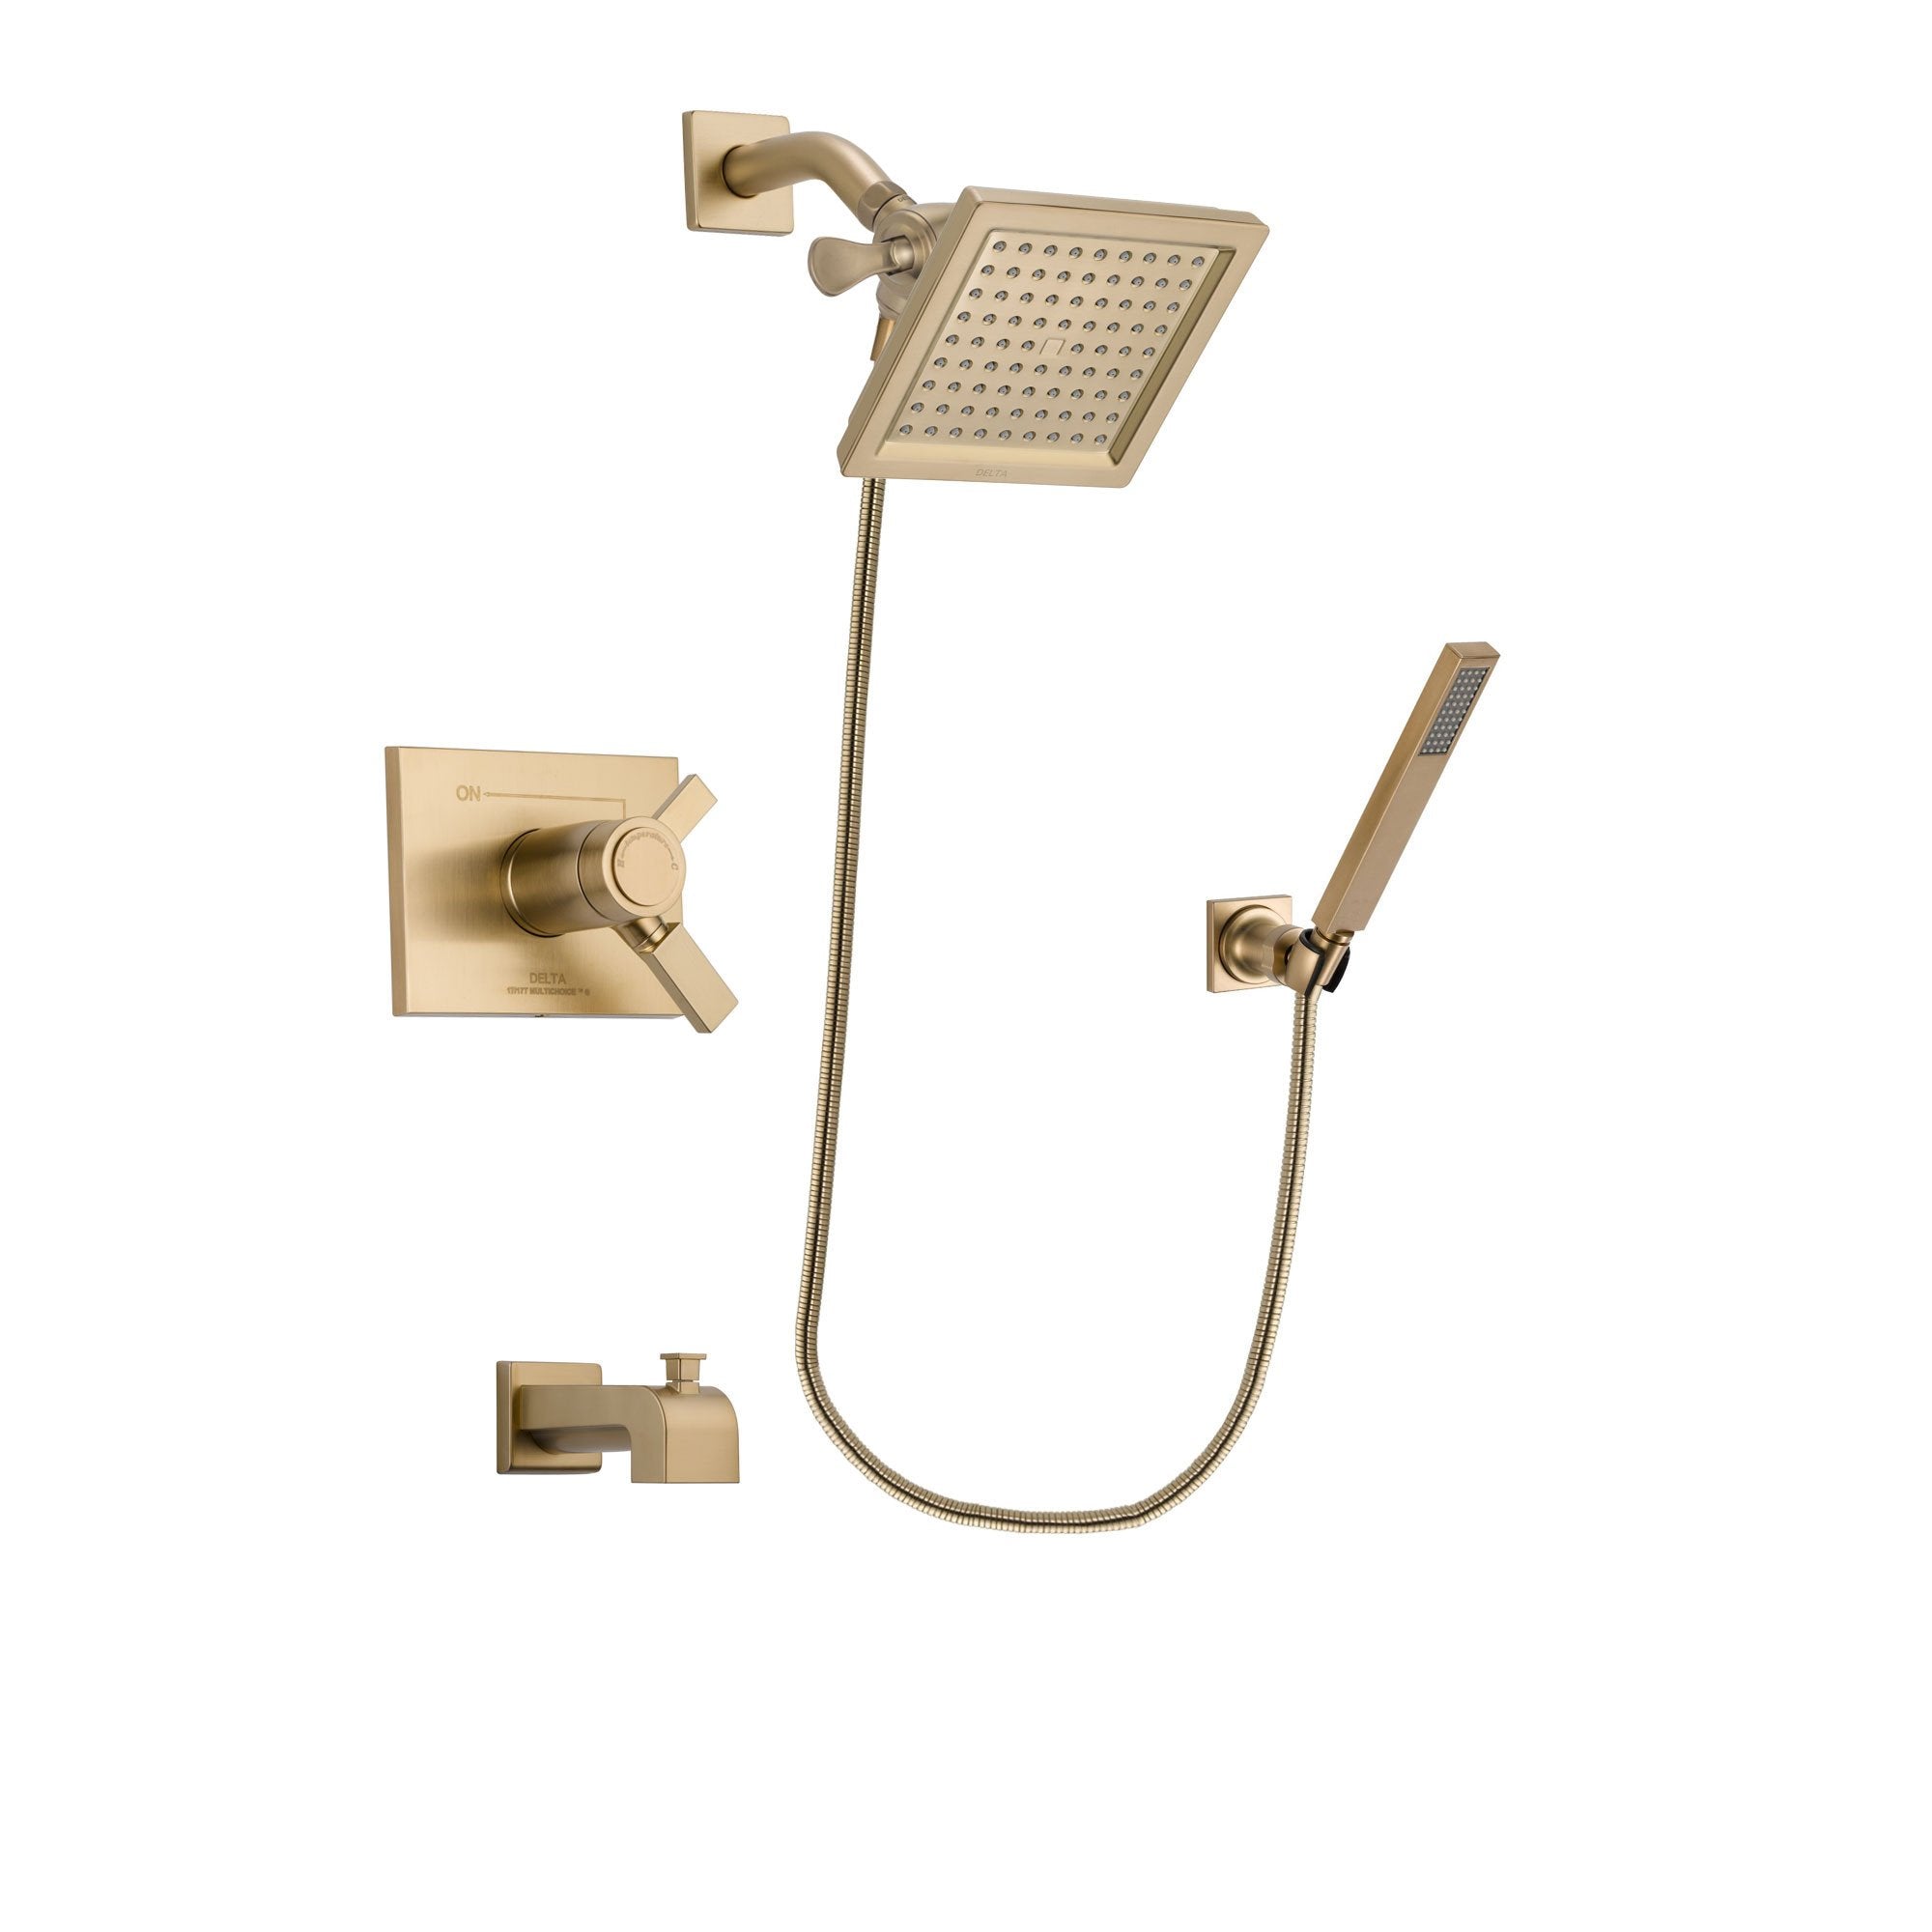 Delta Vero Champagne Bronze Finish Thermostatic Tub and Shower Faucet System Package with 6.5-inch Square Rain Showerhead and Modern Wall-Mount Handheld Shower Stick Includes Rough-in Valve and Tub Spout DSP3887V